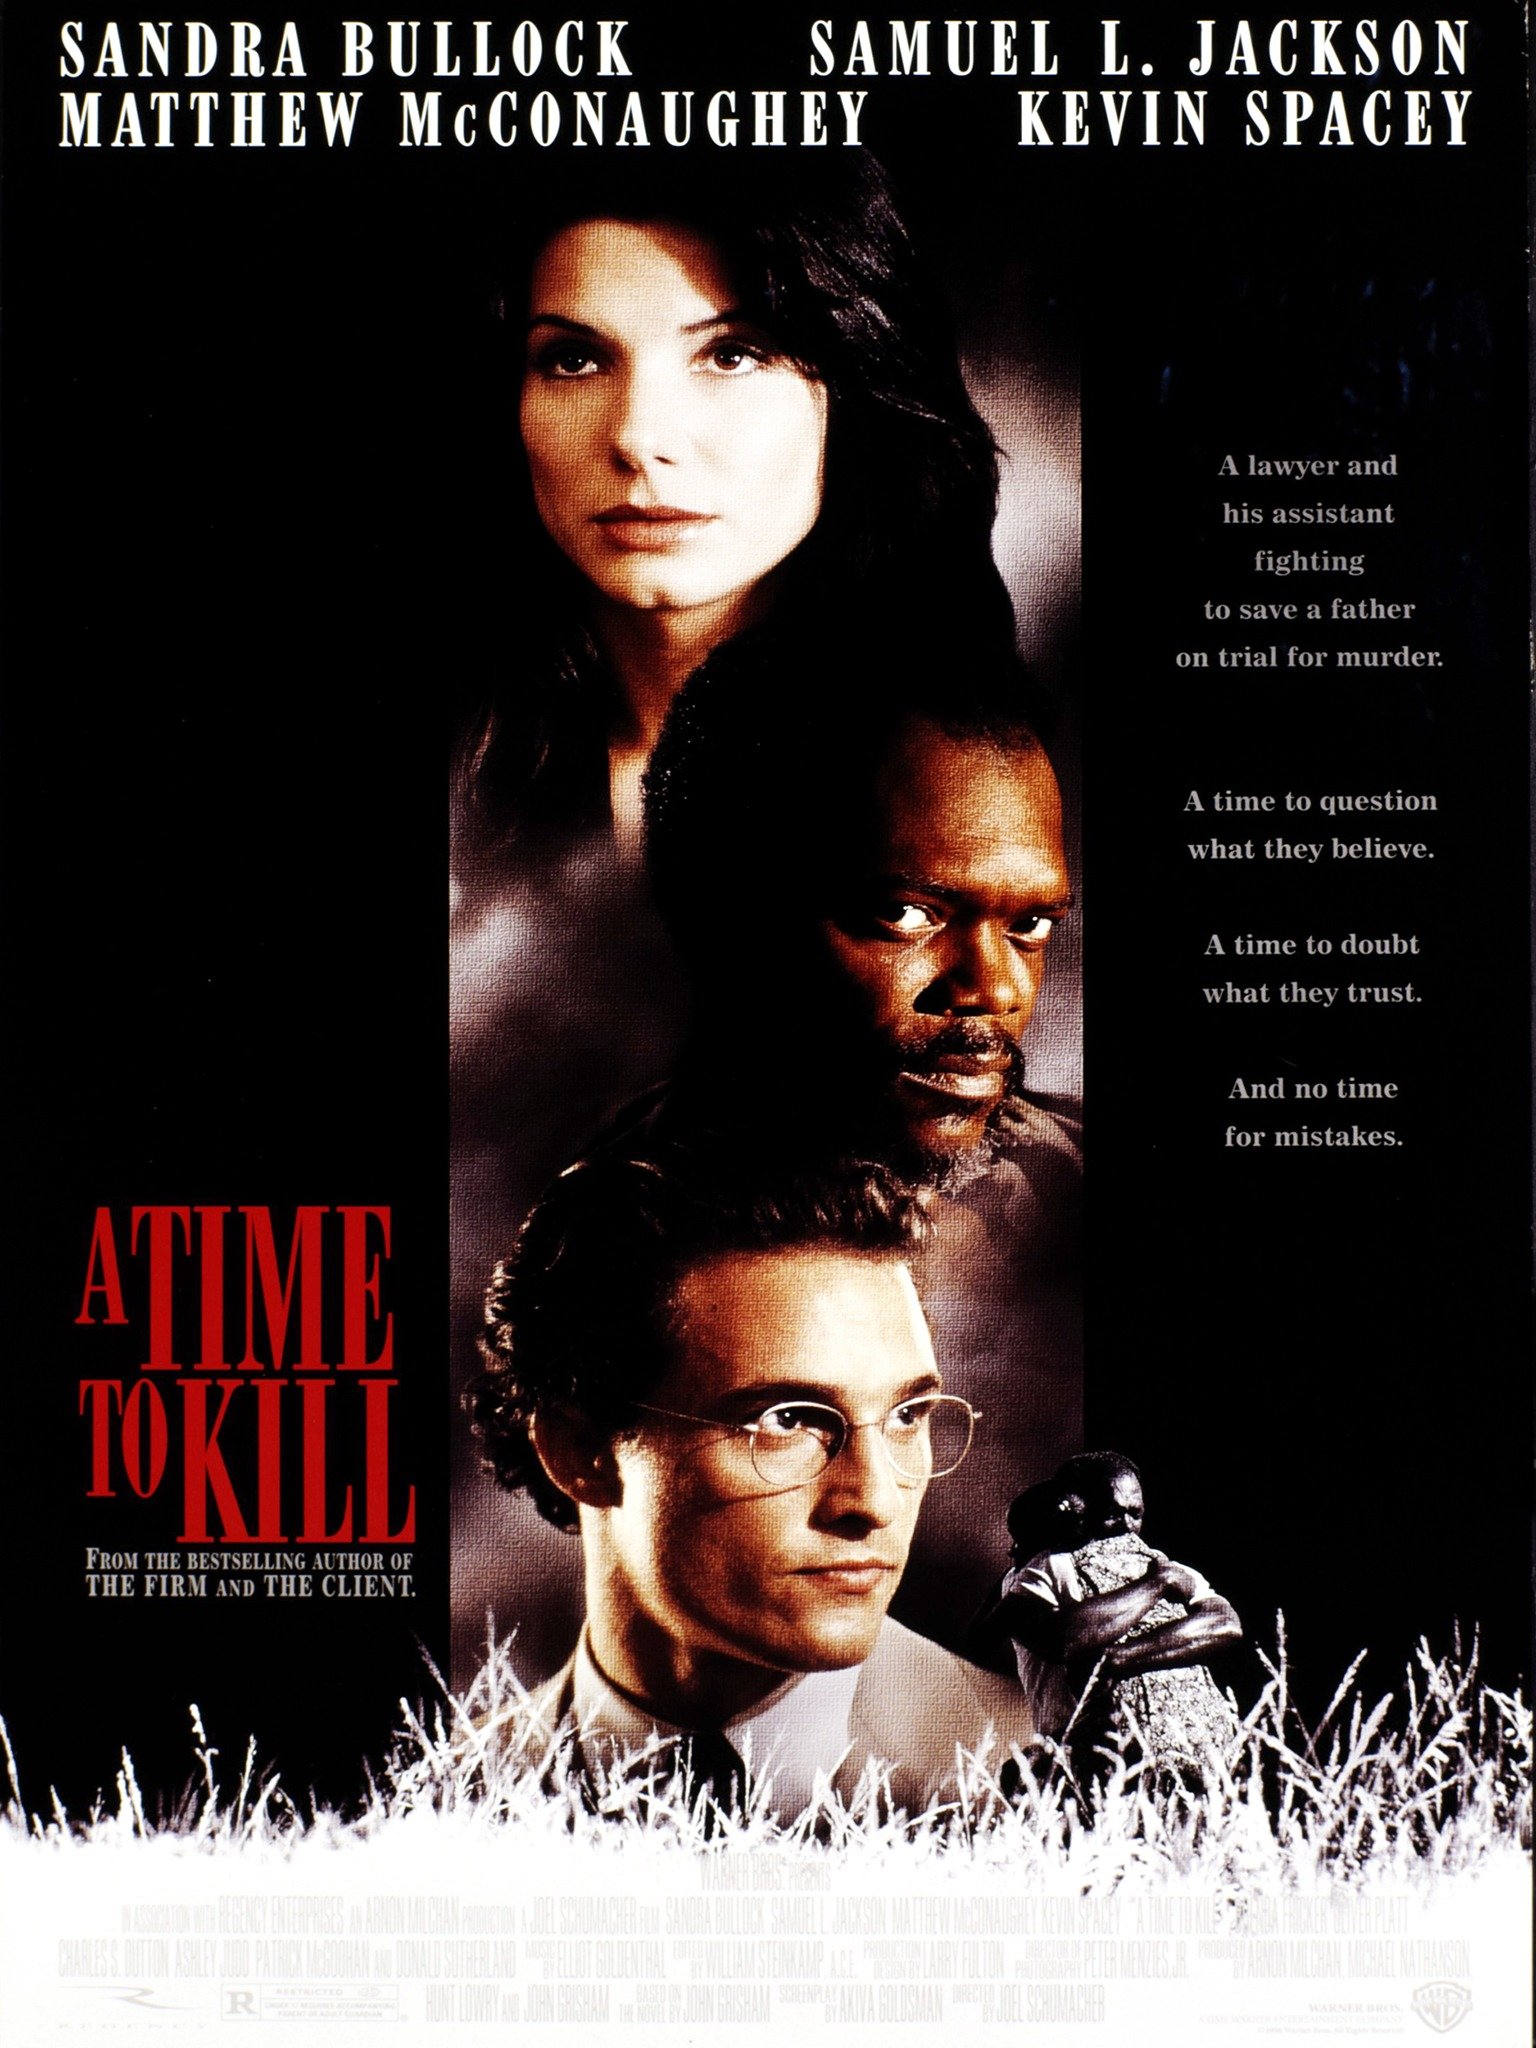 a time to kill movie discussion questions